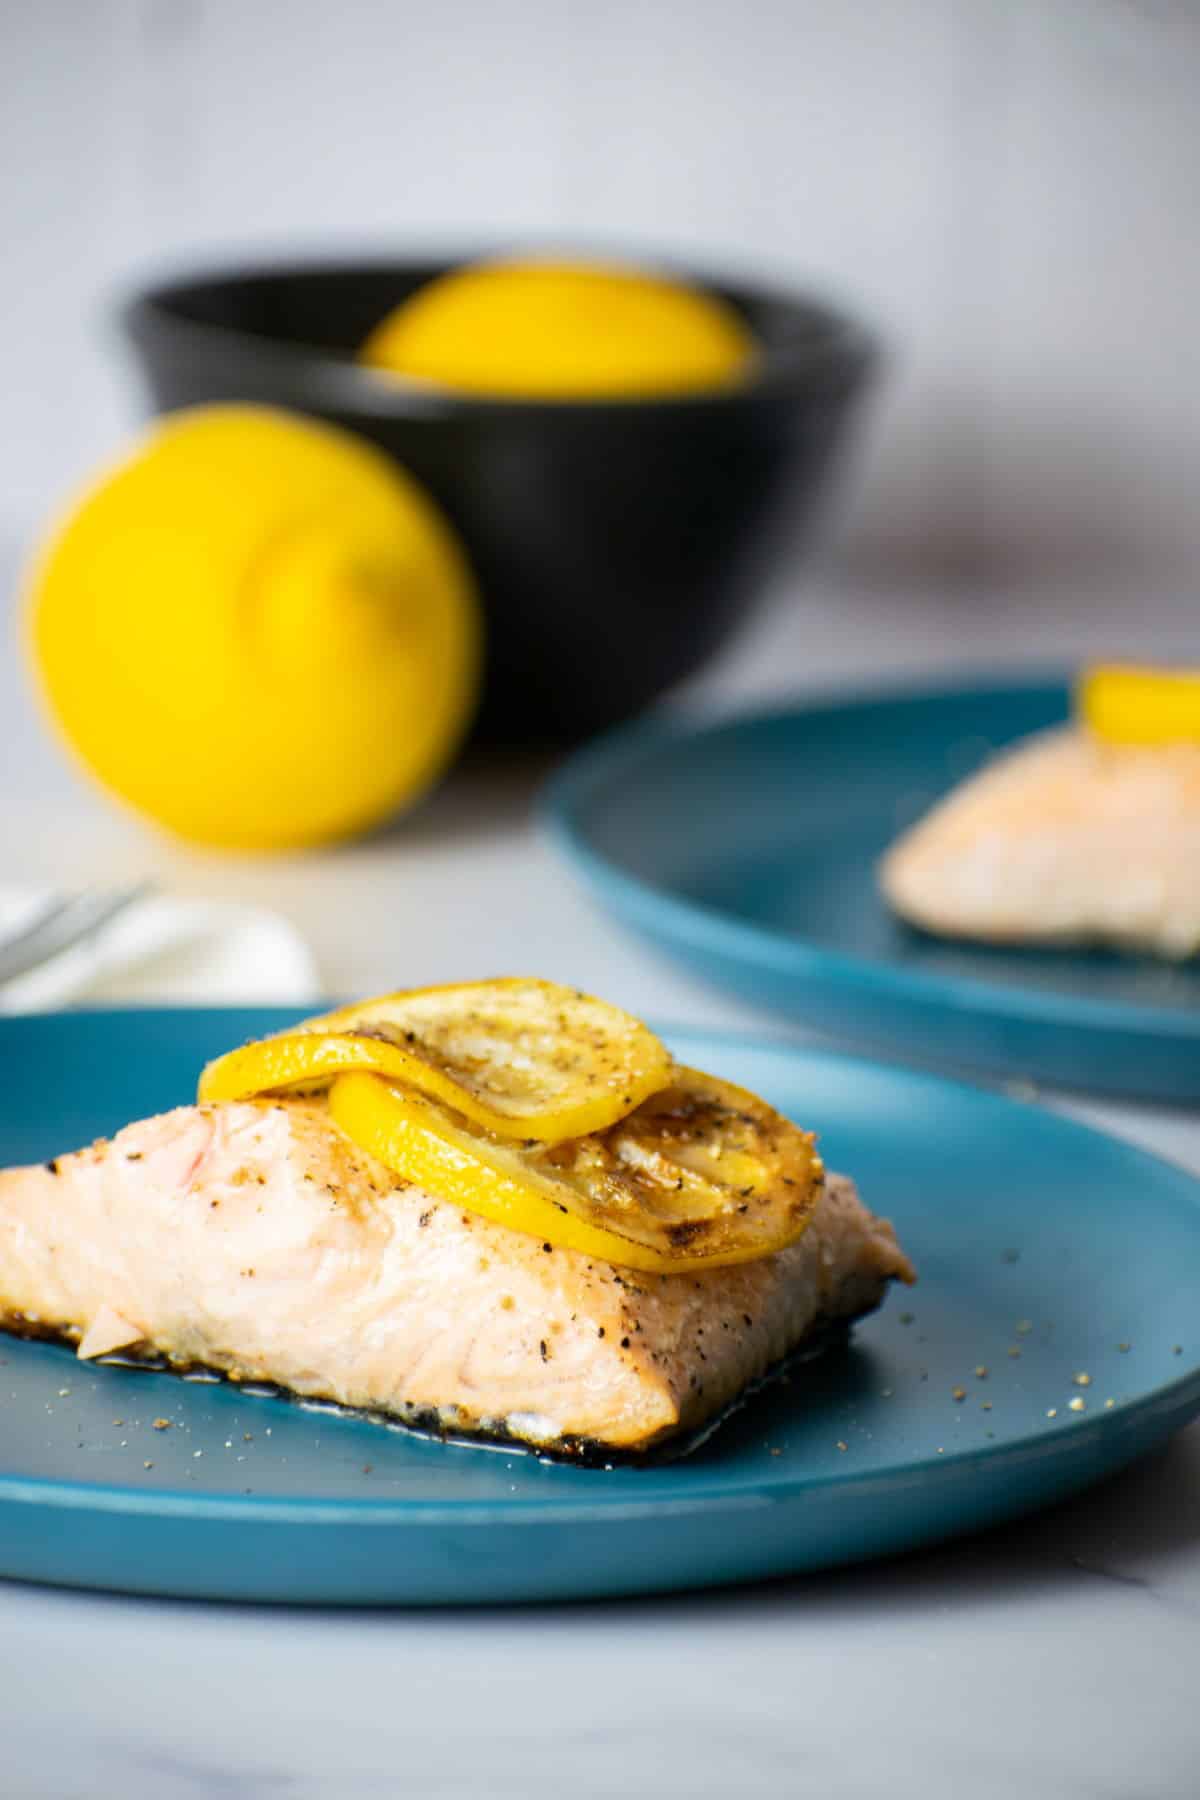 Cooked salmon fillet with lemon slices on blue plate.